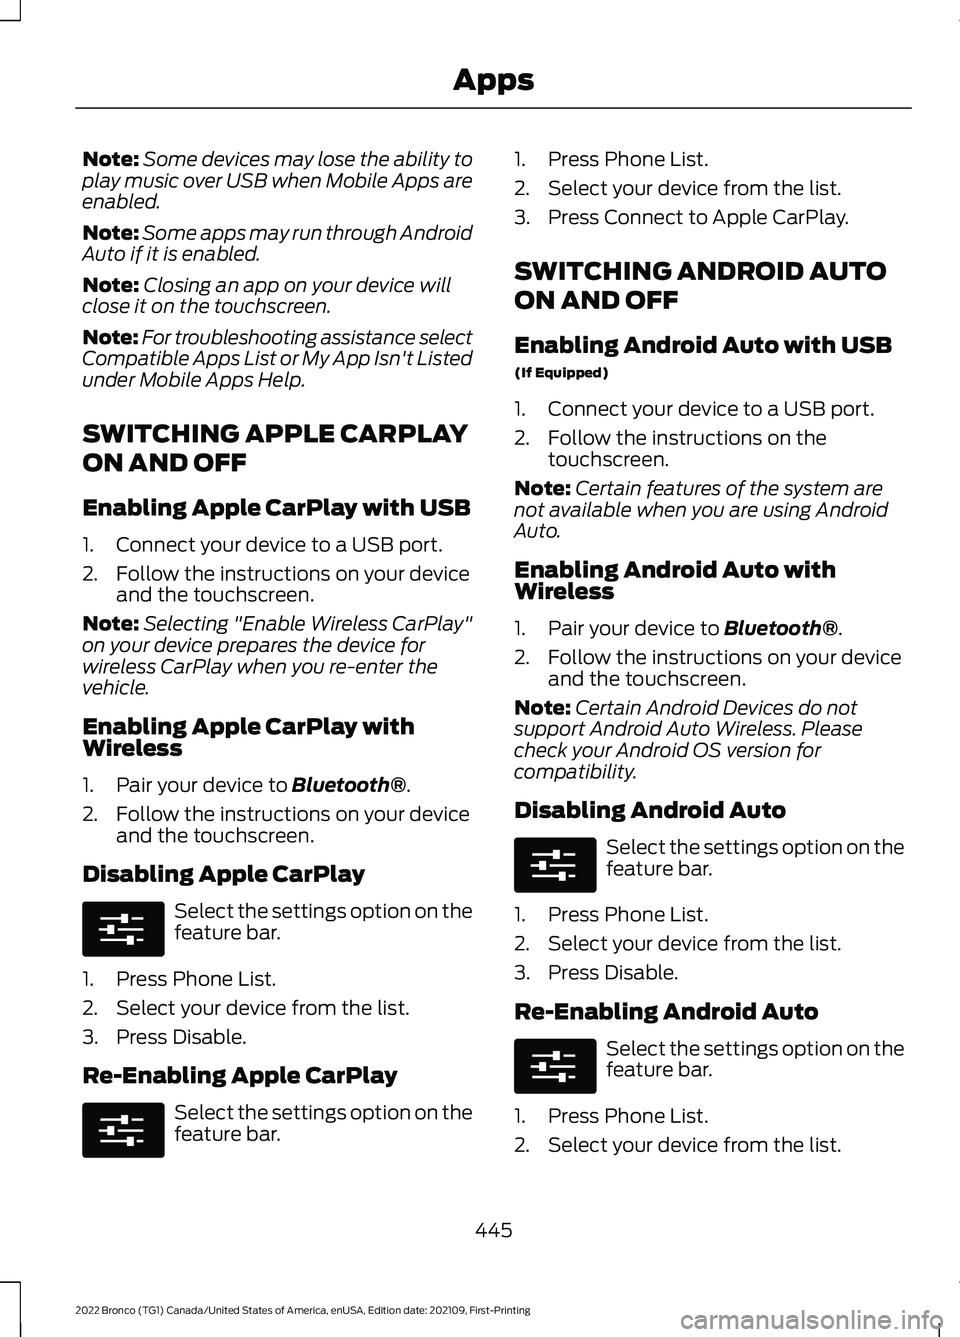 FORD BRONCO 2022  Owners Manual Note:Some devices may lose the ability toplay music over USB when Mobile Apps areenabled.
Note:Some apps may run through AndroidAuto if it is enabled.
Note:Closing an app on your device willclose it o